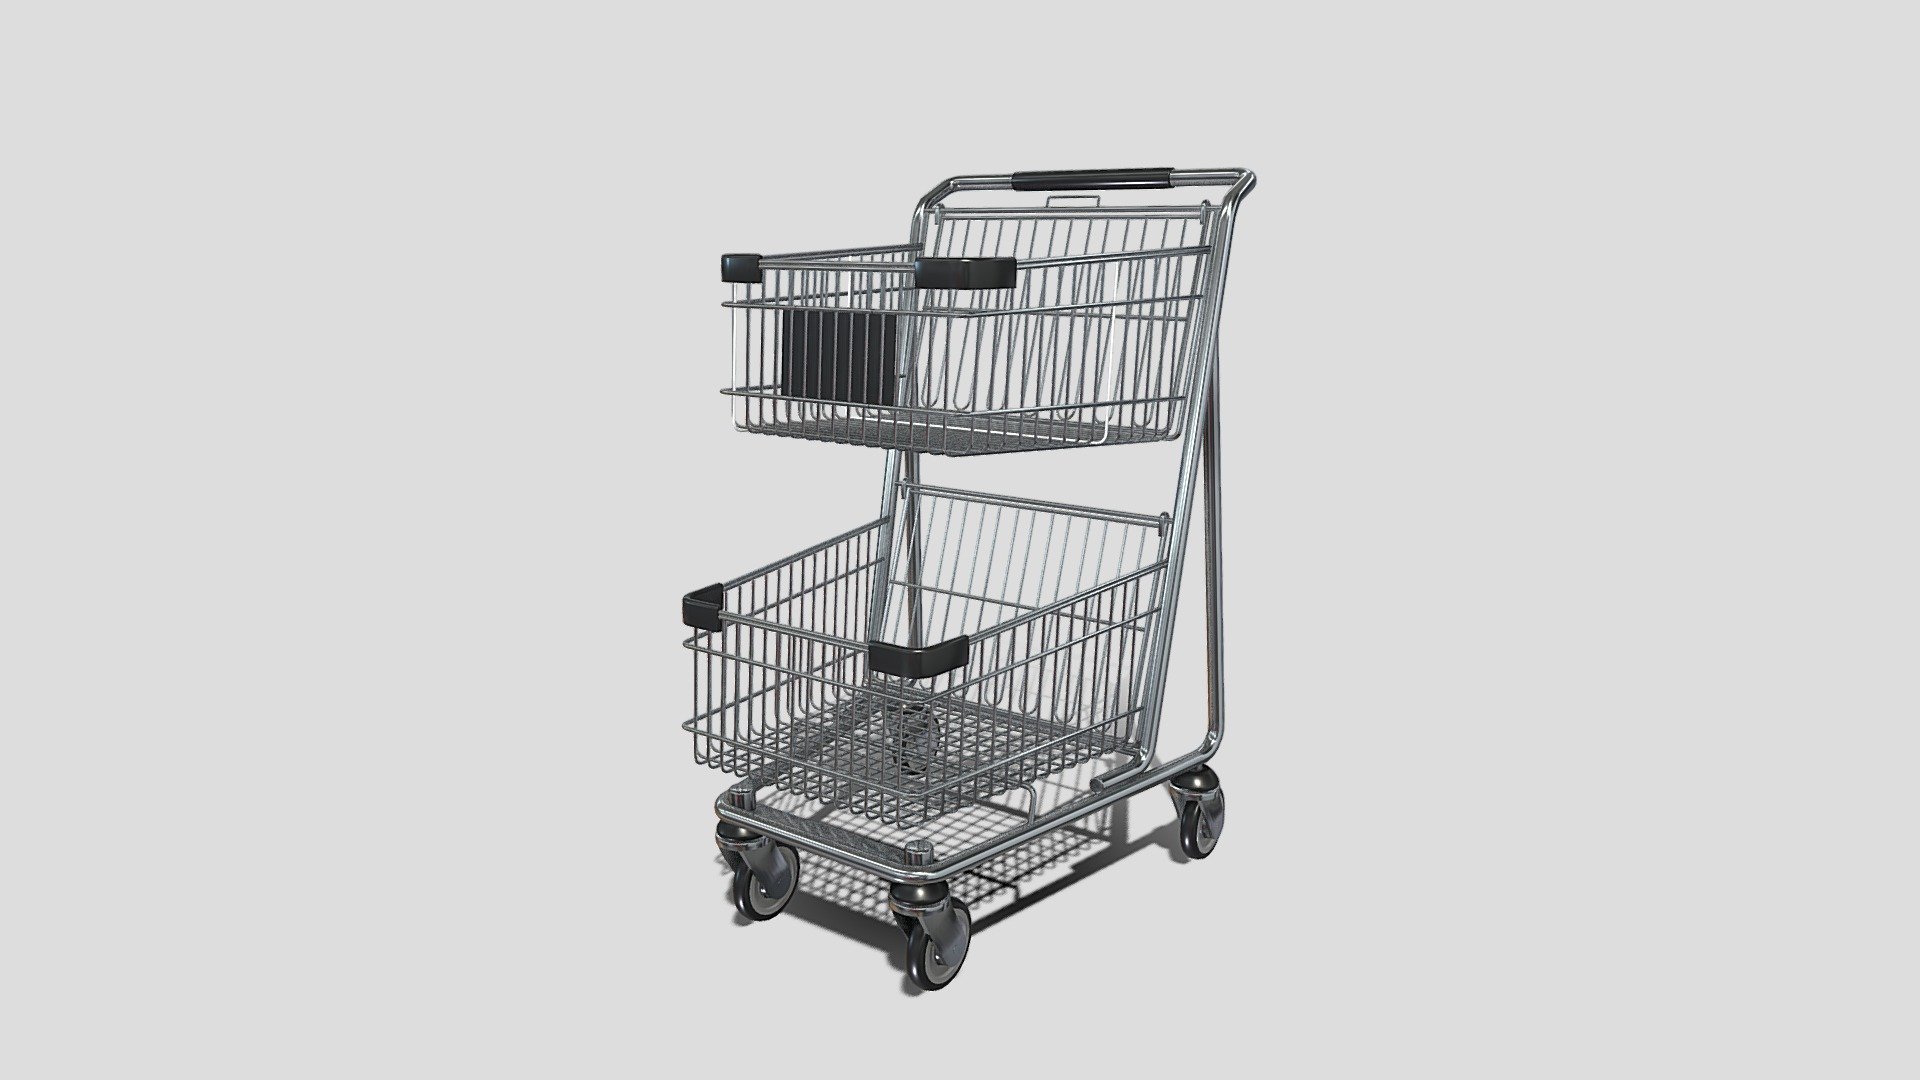 Shopping cart 3d model rendered with Cycles in Blender, as per seen on attached images. 
The model is scaled to real-life scale.

File formats:
-.blend, rendered with cycles, as seen in the images;
-.obj, with materials applied;
-.dae, with materials applied;
-.fbx, with materials applied;
-.stl;

Files come named appropriately and split by file format.

3D Software:
The 3D model was originally created in Blender 3.1 and rendered with Cycles.

Materials and textures:
The models have materials applied in all formats, and are ready to import and render.
Materials are image based using PBR, the model comes with five 4k png image textures.

Preview scenes:
The preview images are rendered in Blender using its built-in render engine &lsquo;Cycles'.
Note that the blend files come directly with the rendering scene included and the render command will generate the exact result as seen in previews.

For any problems please feel free to contact me.

Don't forget to rate and enjoy! - Shopping_cart_v9_obj - Buy Royalty Free 3D model by dragosburian 3d model